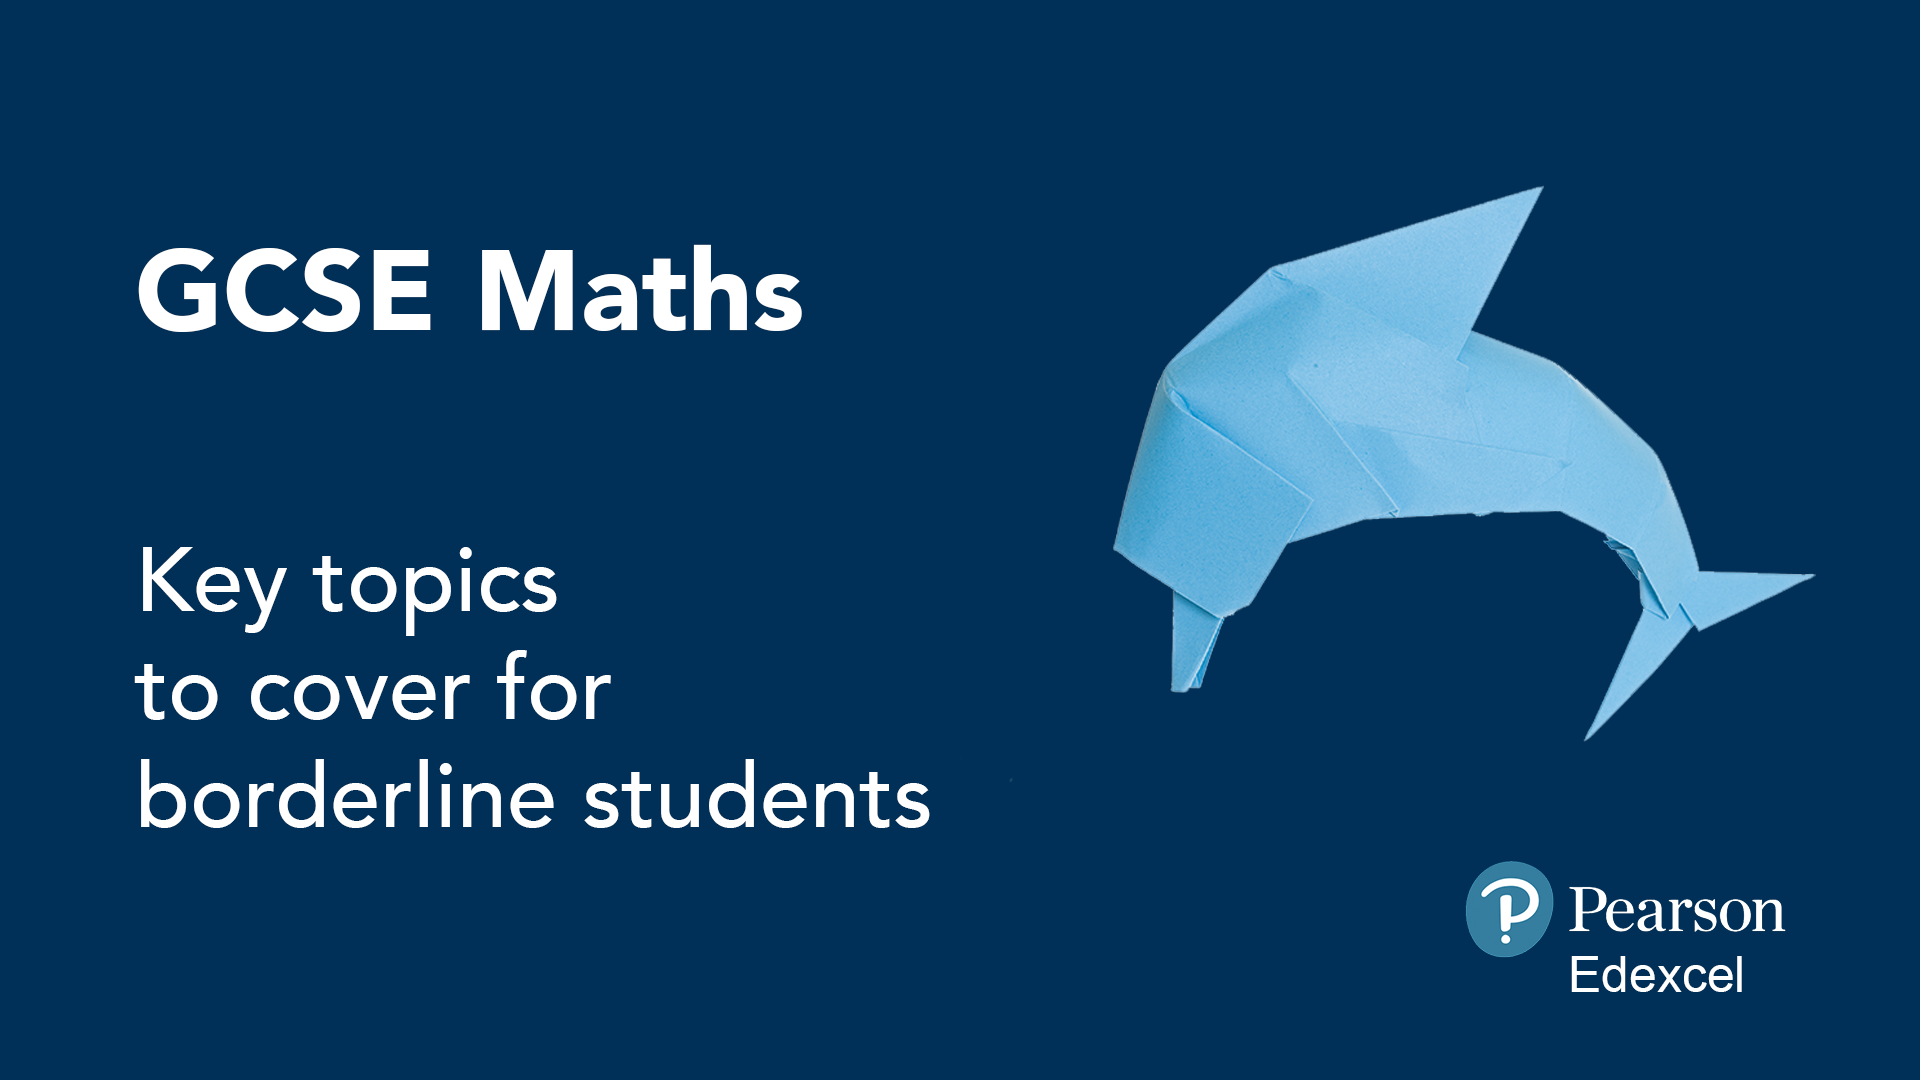 GCSE Maths: Key topics to cover for borderline students